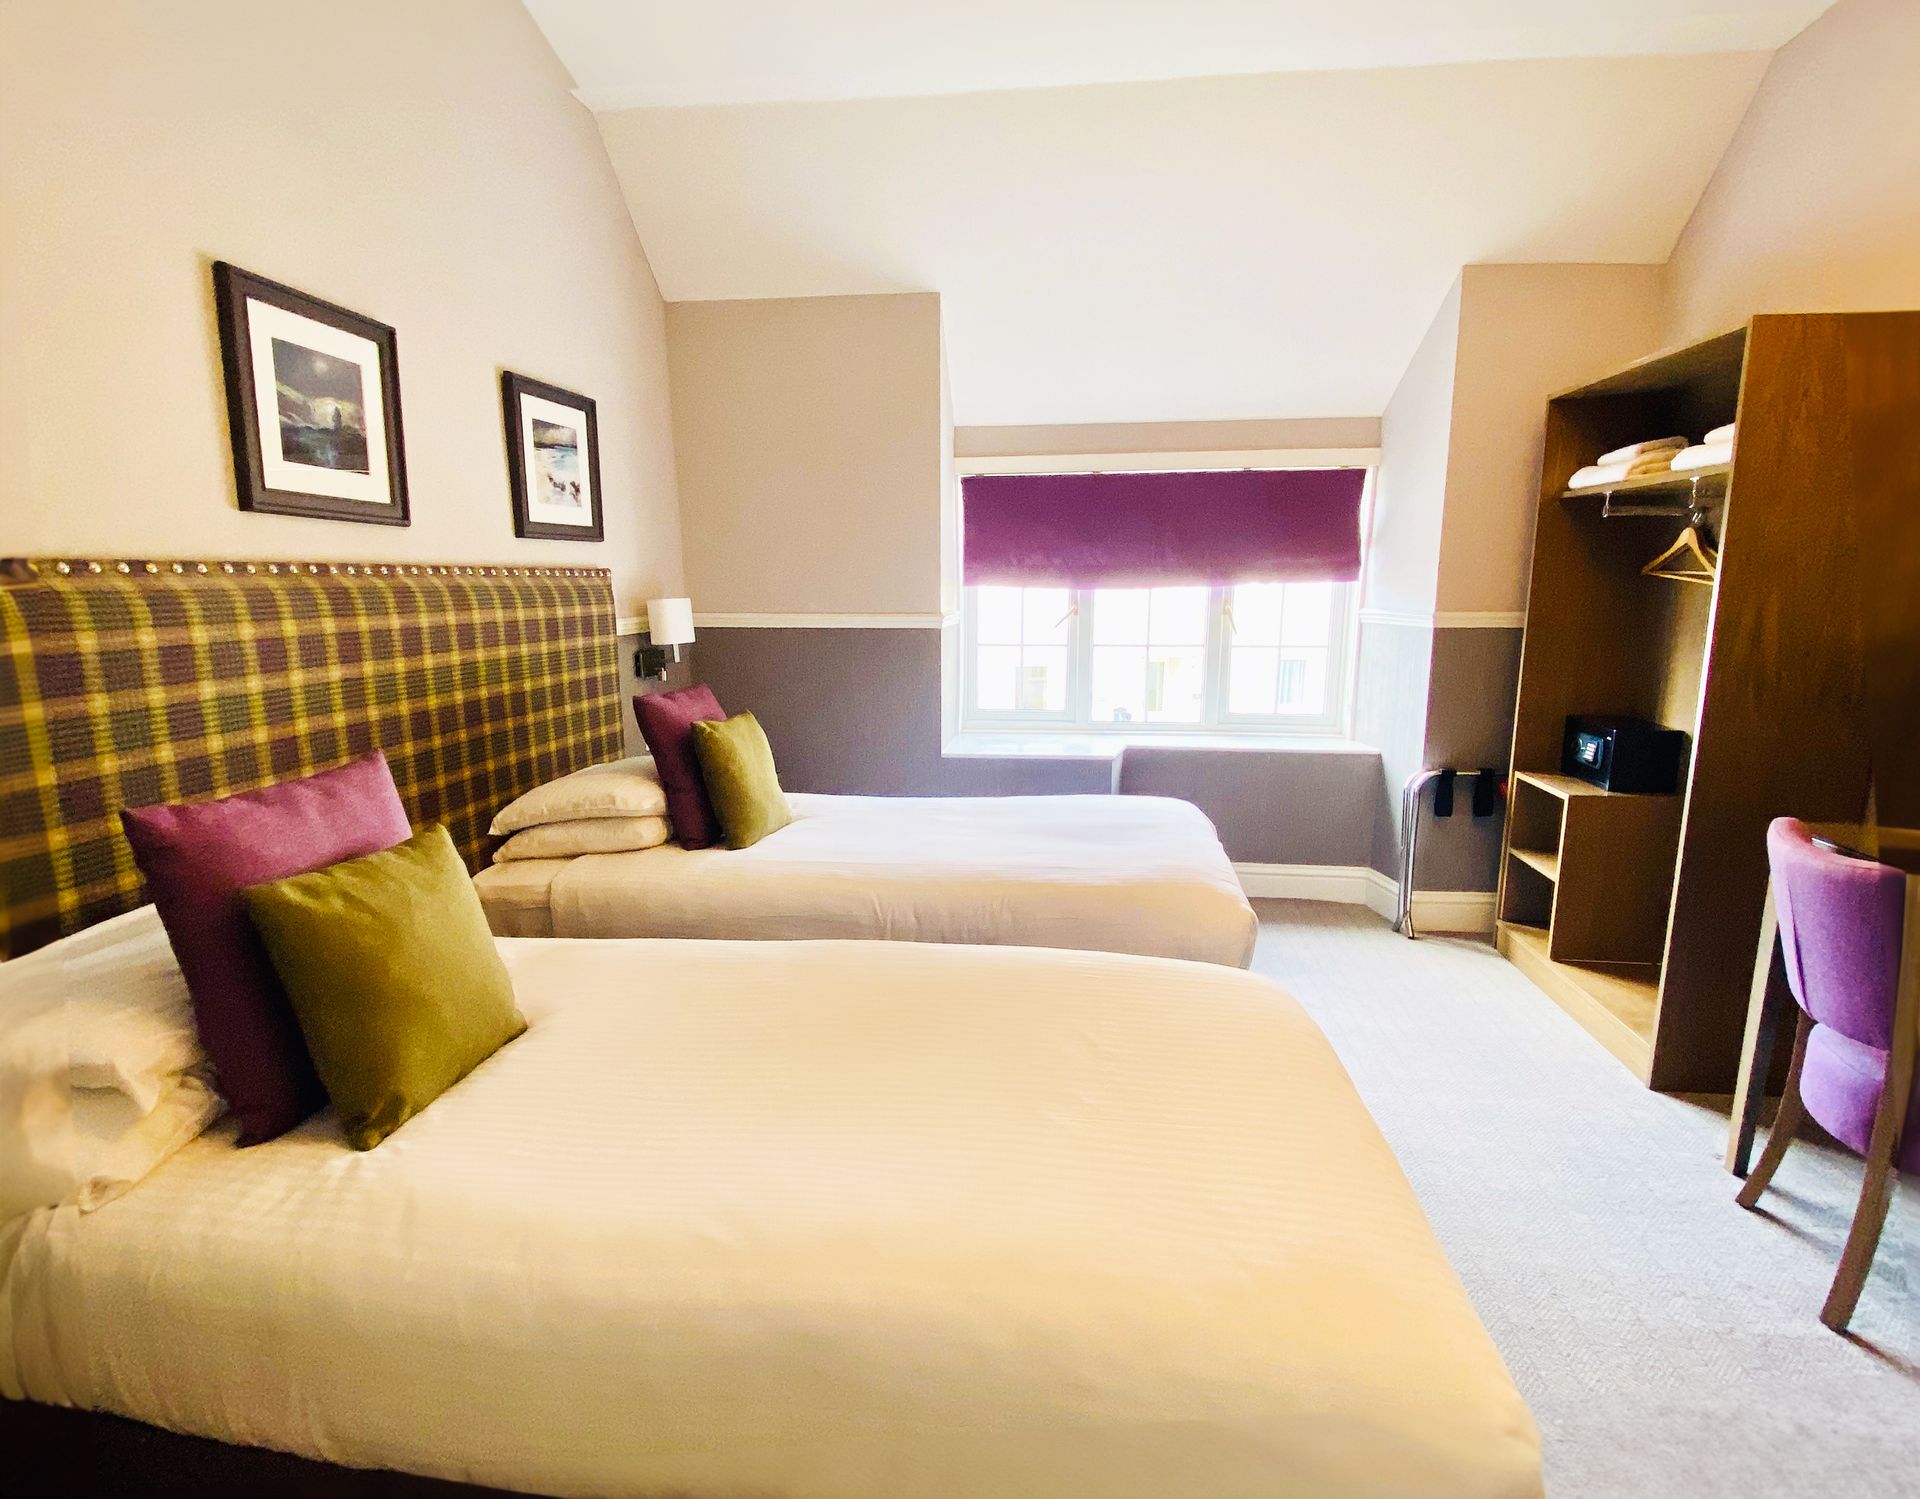 Double or twin room at Balmacara Hotel at the Highlands in Scotland